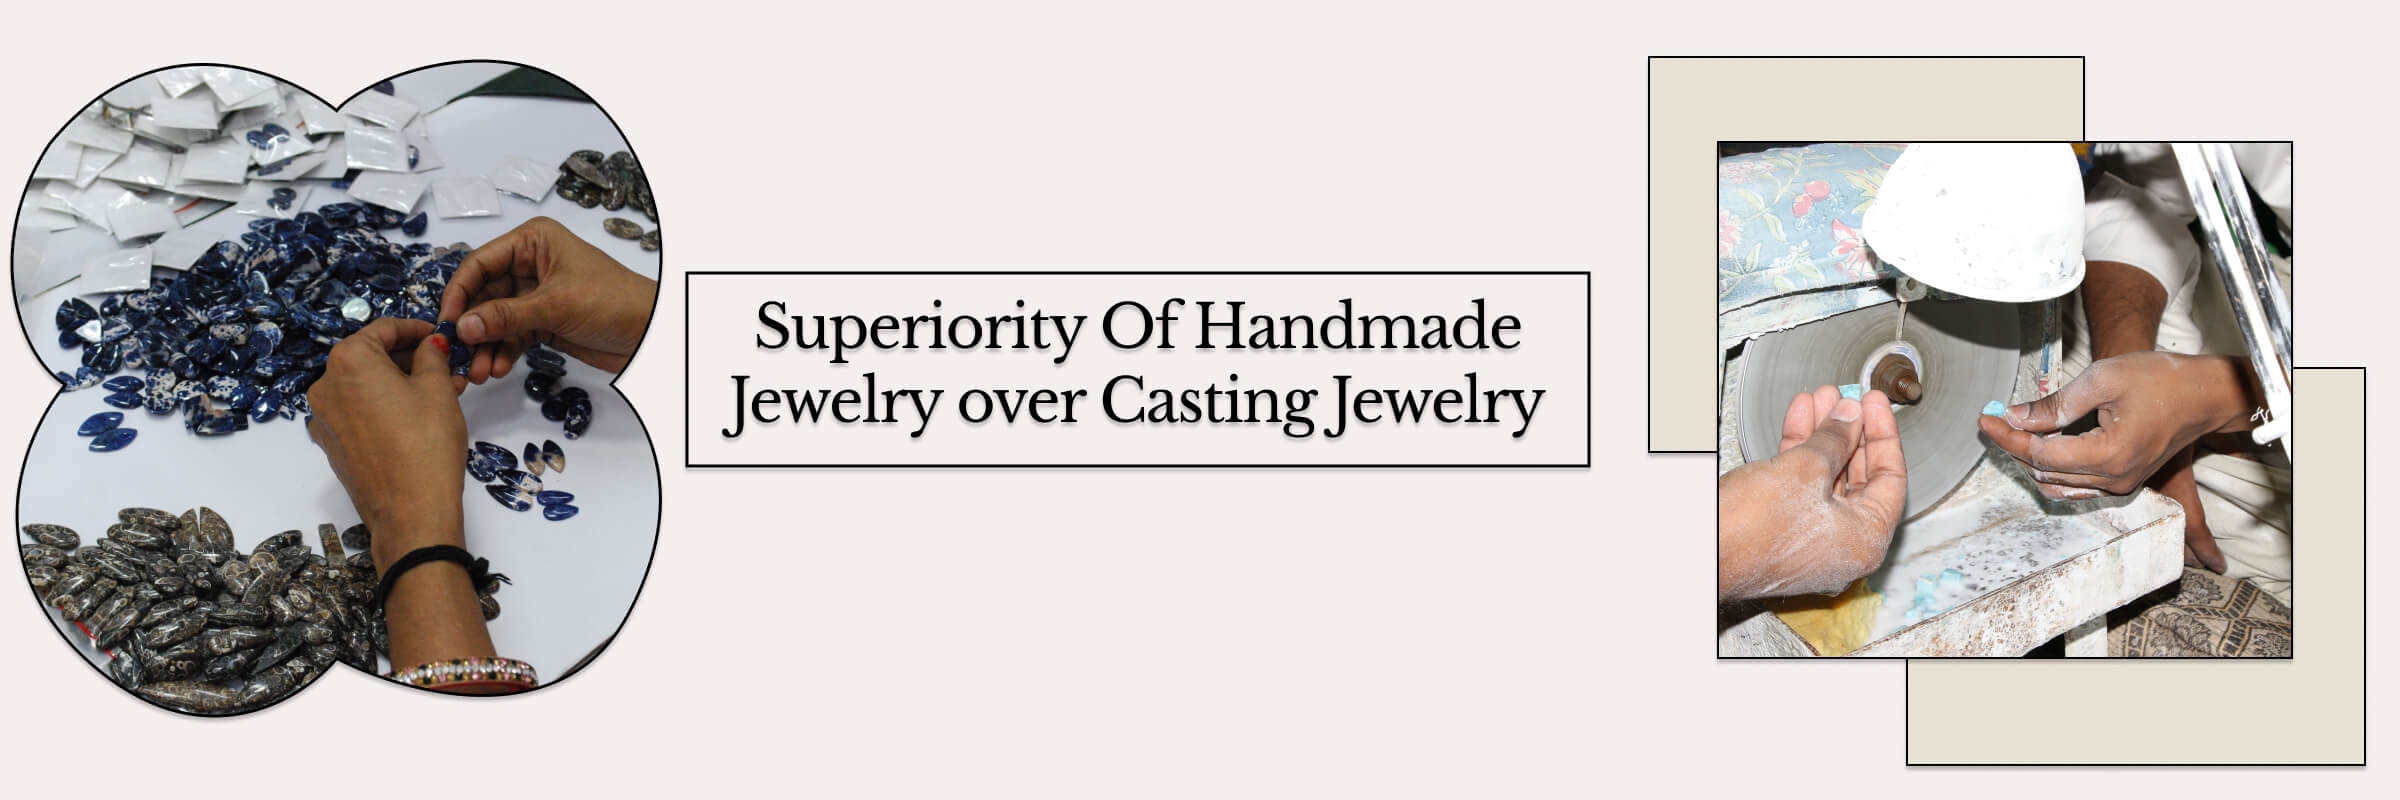 What Counts Handmade Jewelry Good Over Casting!